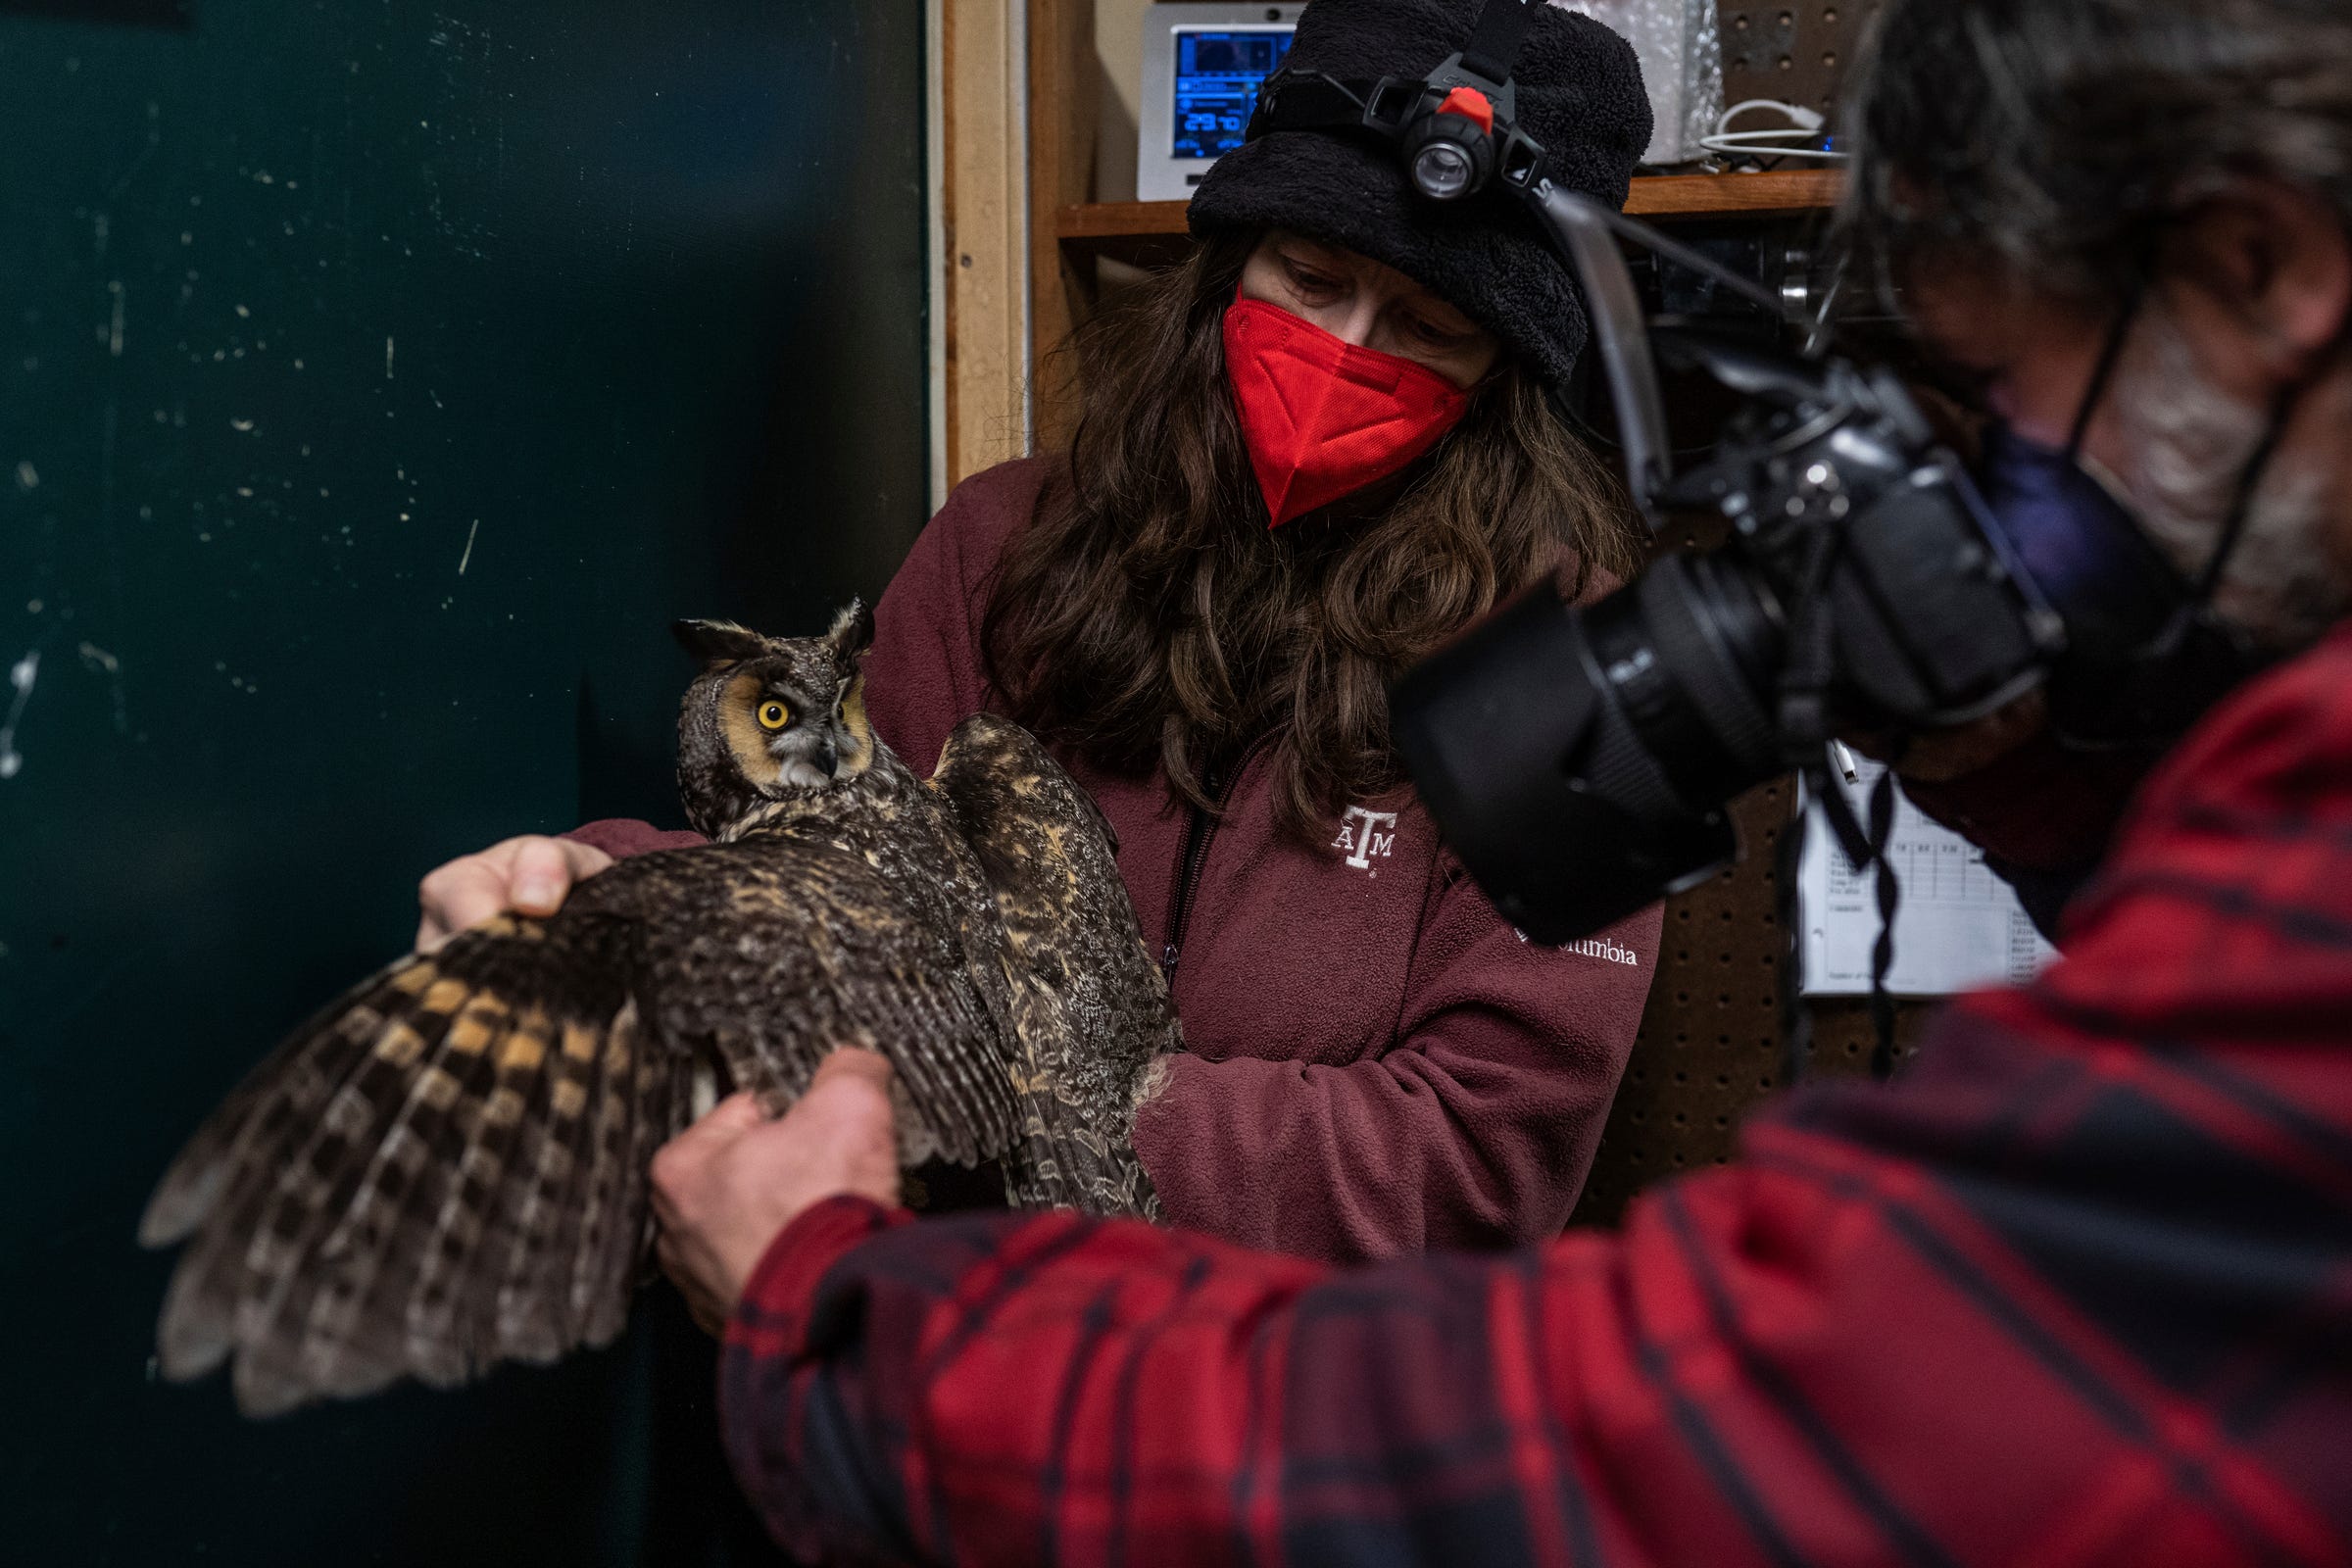 Owl bander Nova Mackentley, left, helps hold a long-eared owl for fellow bander Chris Neri, to photograph in the banding lab at the Whitefish Point Bird Observatory in Paradise located in Michigan's Upper Peninsula early Friday, April 21, 2023, as they work to document the owls caught during their spring migration. The Banders often post photos taken in front of the green door to a blog following their progress through the season on the Whitefish Point Bird Observatory's website.